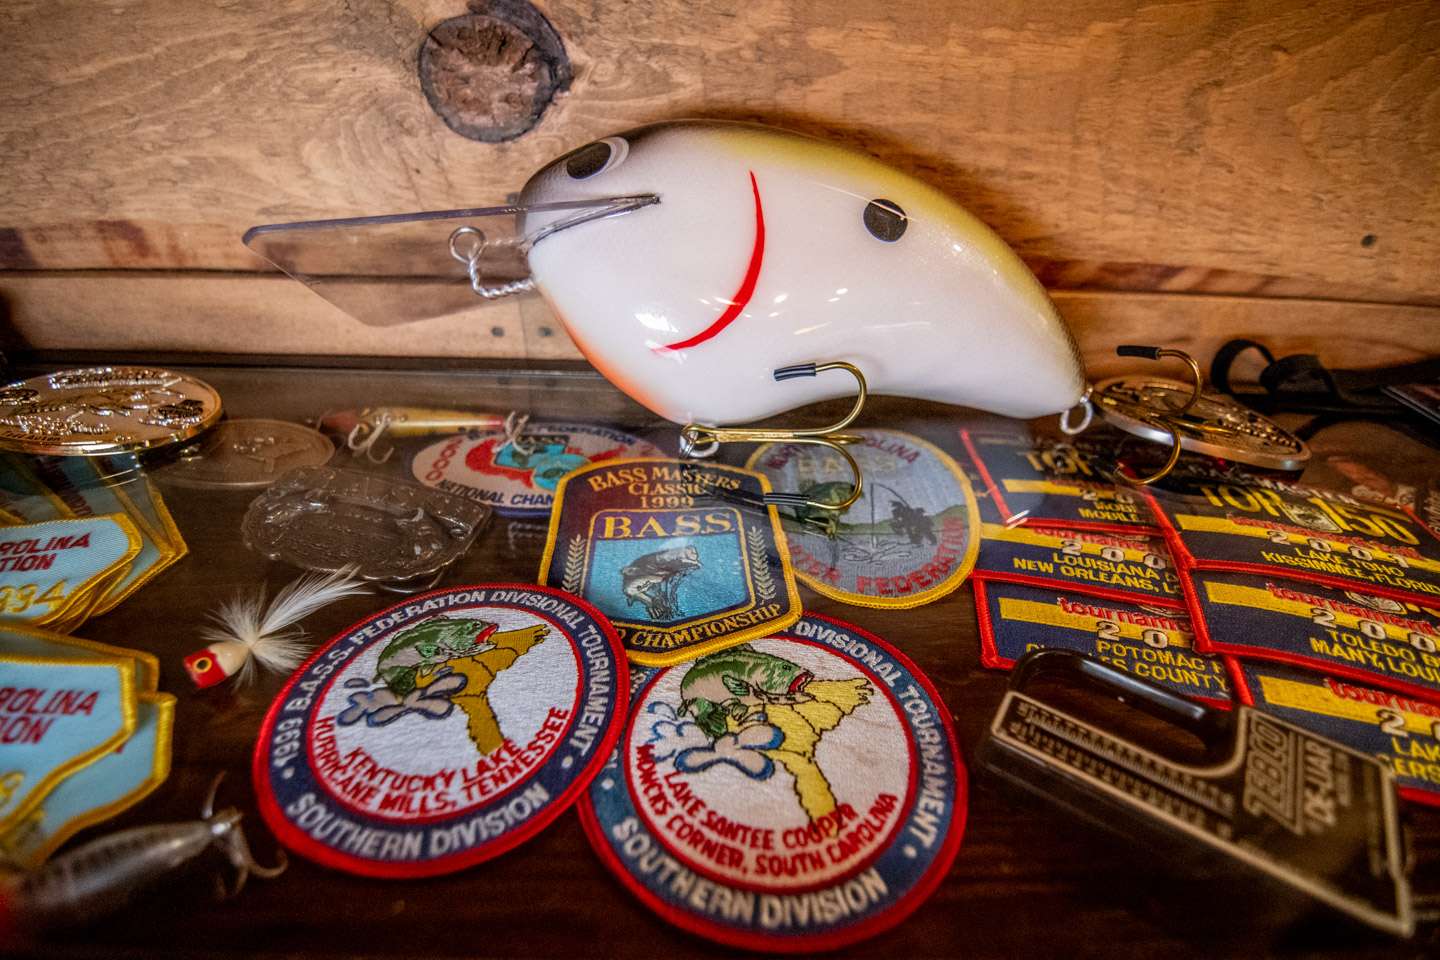 A 1999 BASS Masters Classic patch, a few B.A.S.S. Federation patches and a giant square bill replica made by a friend add to the nostalgic look. 